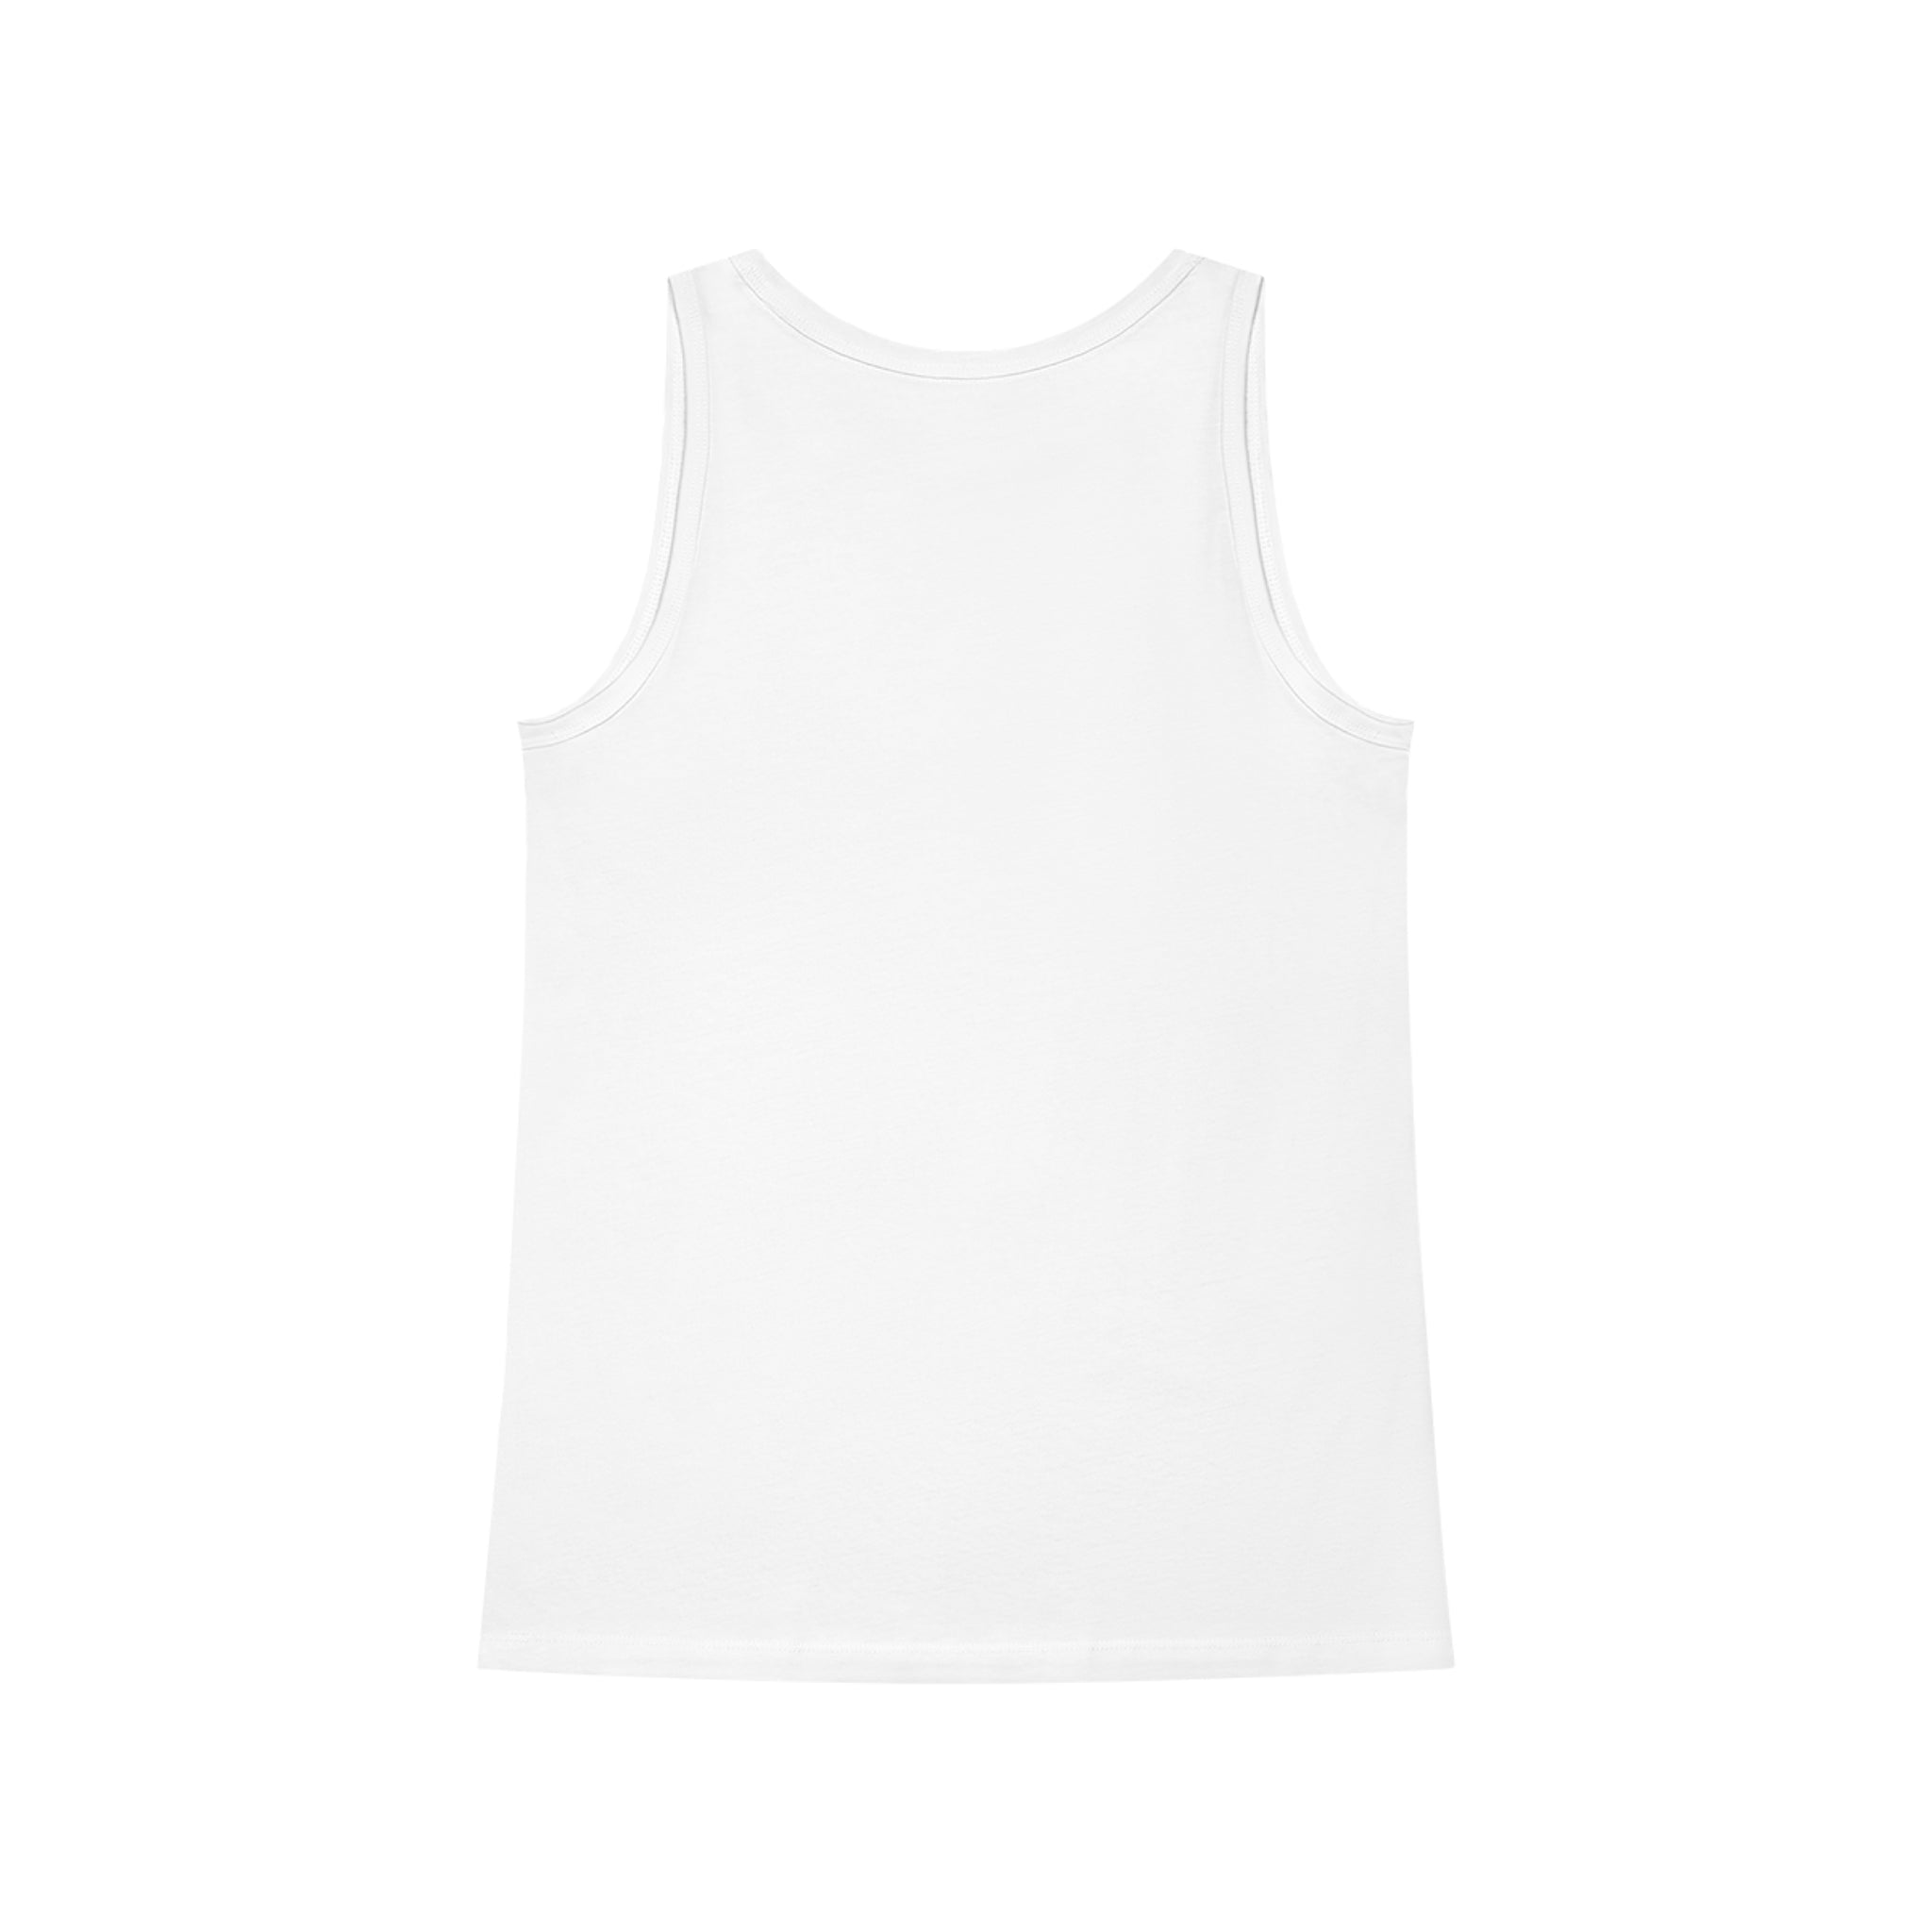 An Anemones Tank Top on a white background.